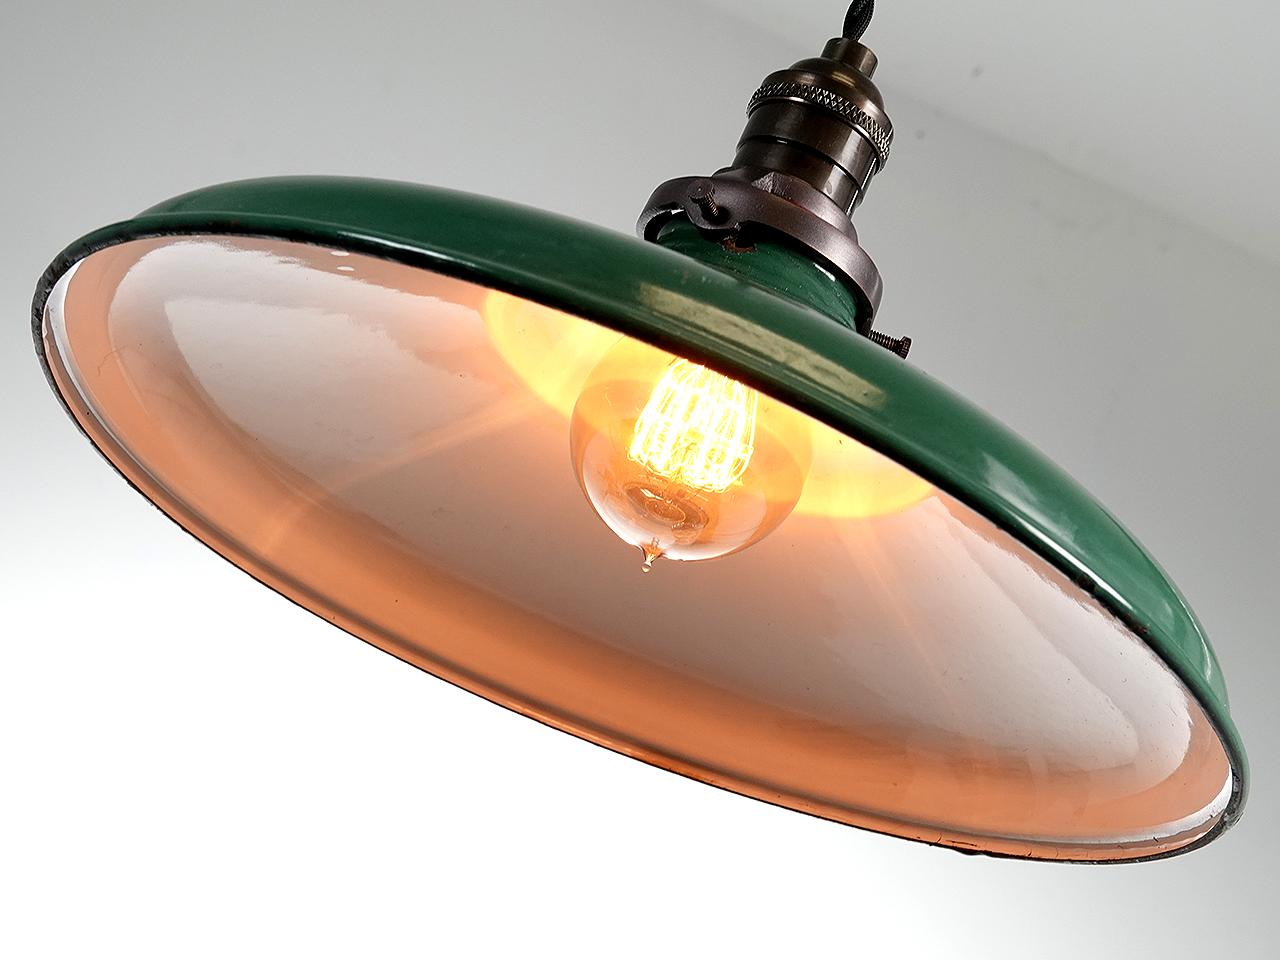 These are classic and early green over white industrial fixtures. They are a bit different having a unique shallow profile.

Note that the main picture shows a group of separate 3 lamps. They are sold and priced per lamp... this way you can